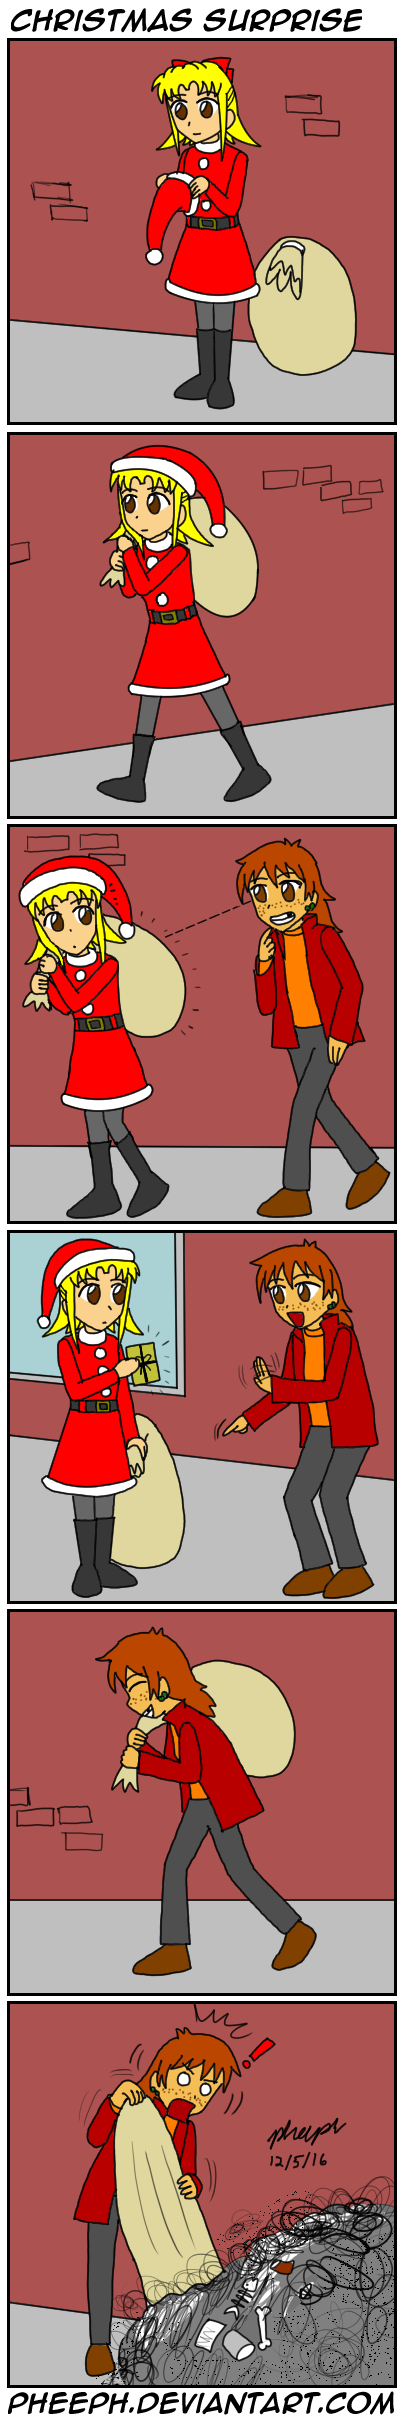 Page 27 - Christmas Surprise